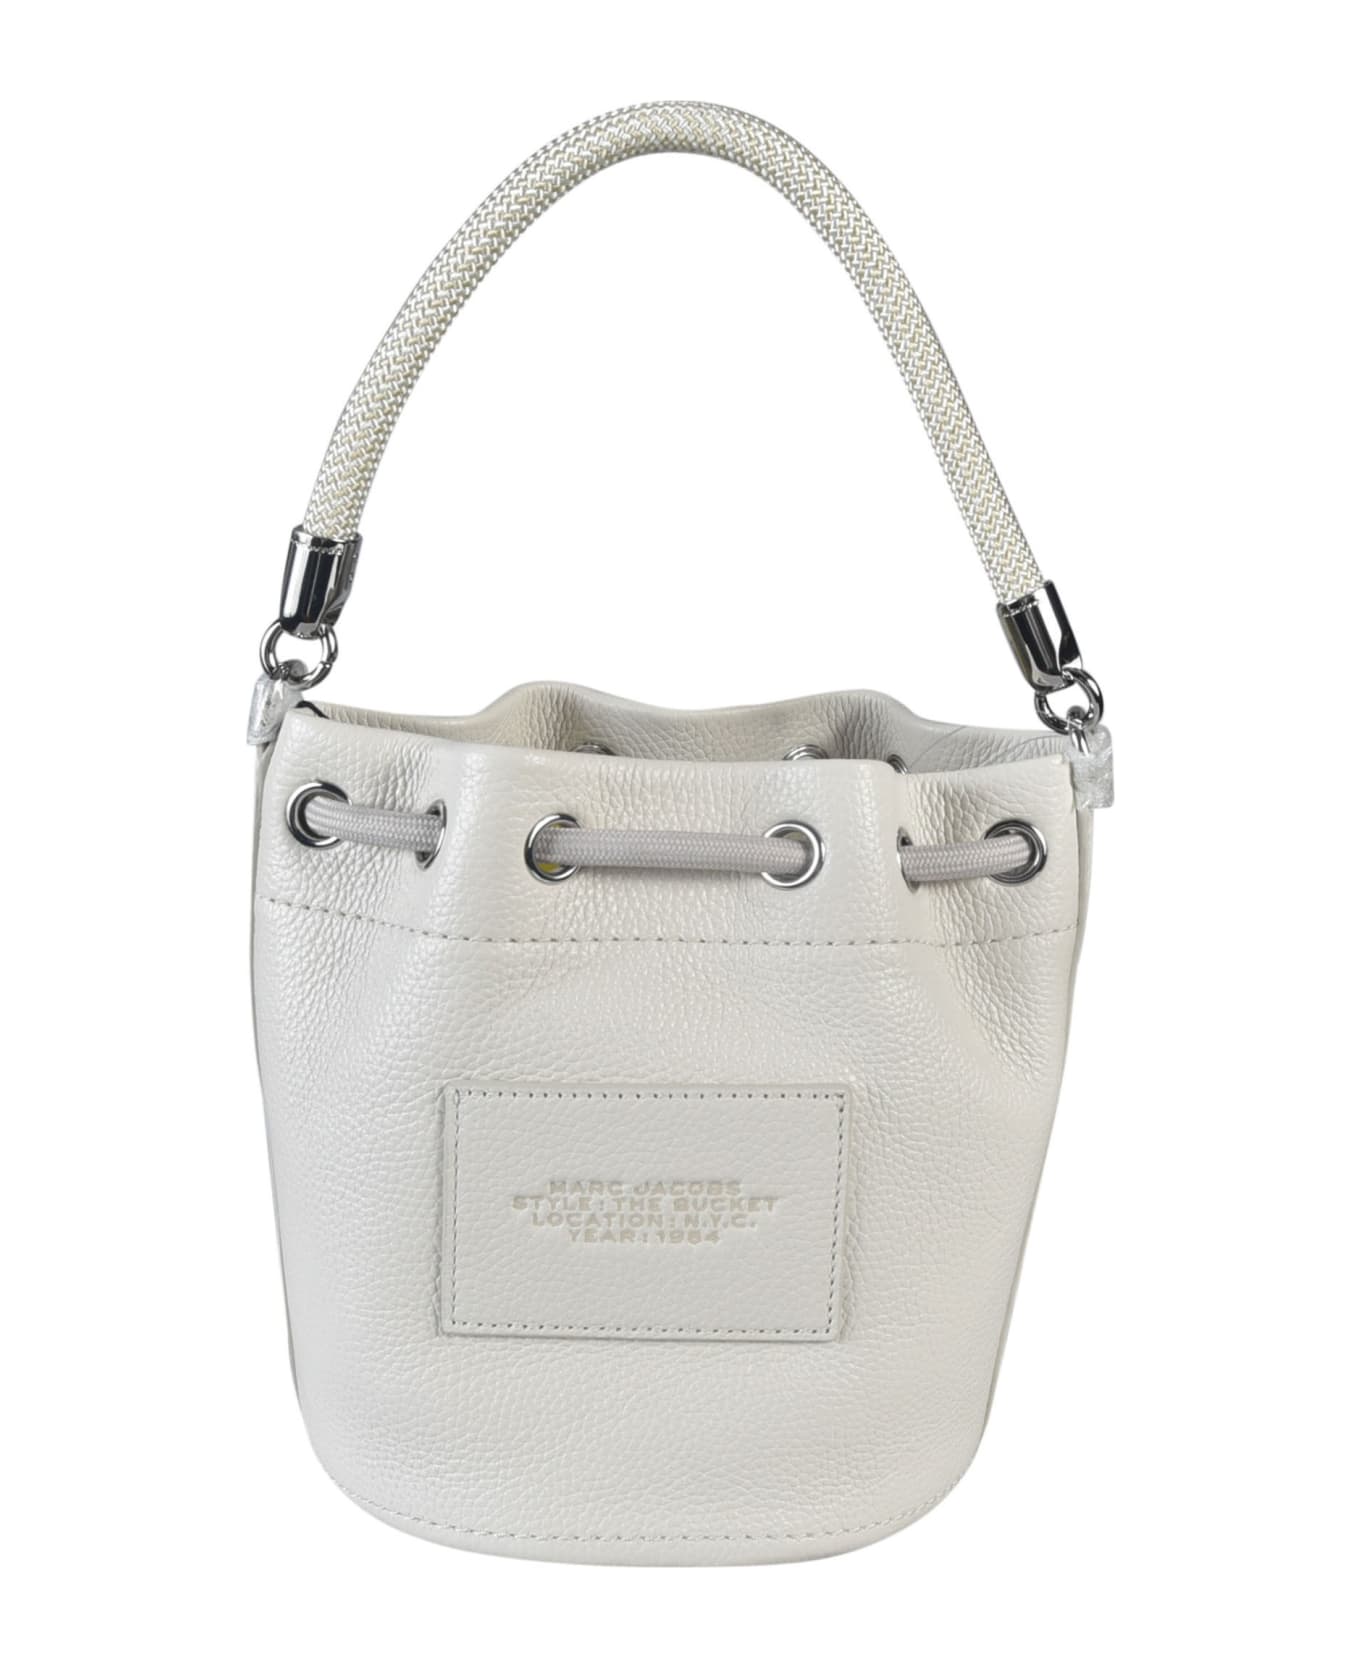 Marc Jacobs The Bucket - Bucket Bag - White トートバッグ